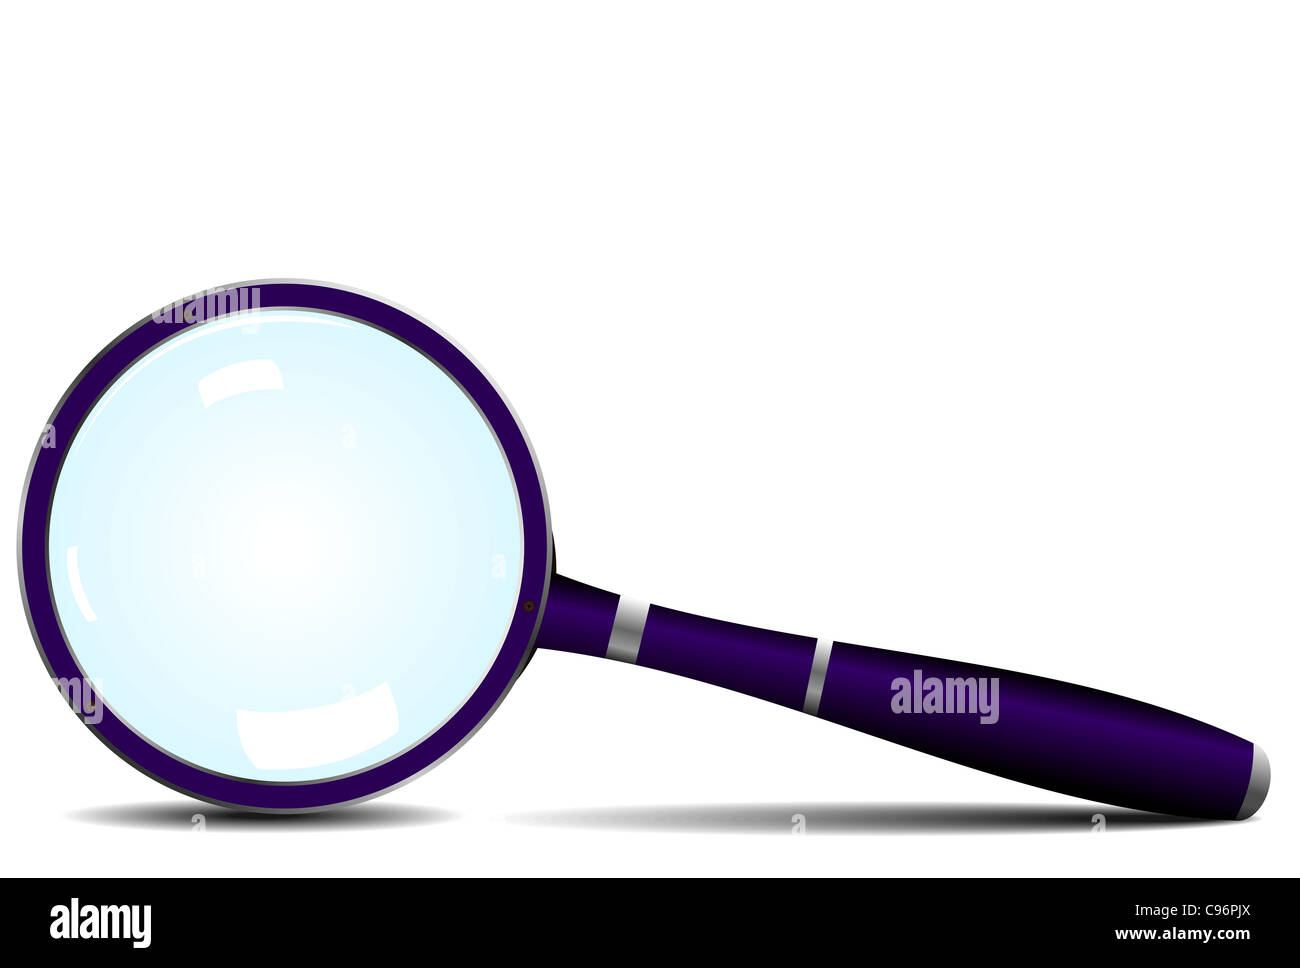 Magnifying glass icon - vector Stock Photo